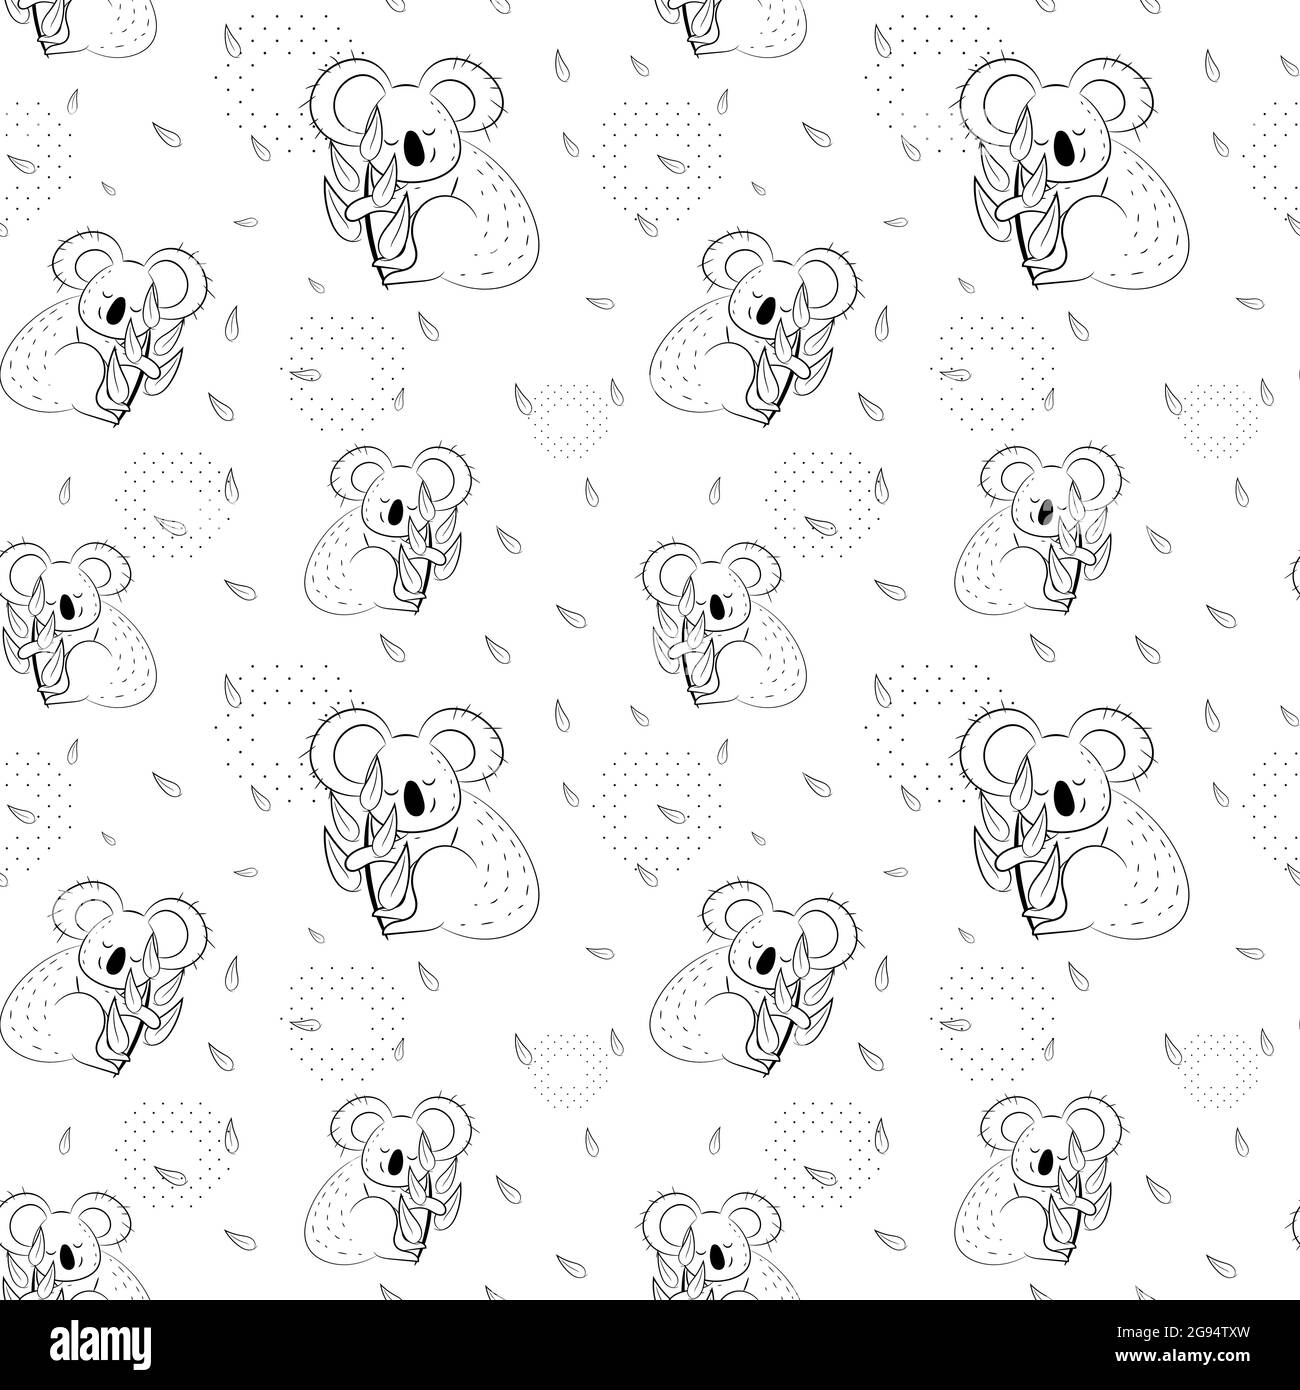 Cute bear koala doodle seamless pattern. Vector background with koalas can be used for baby textile, tshirt, wallpapers, posters and more. Stock Vector